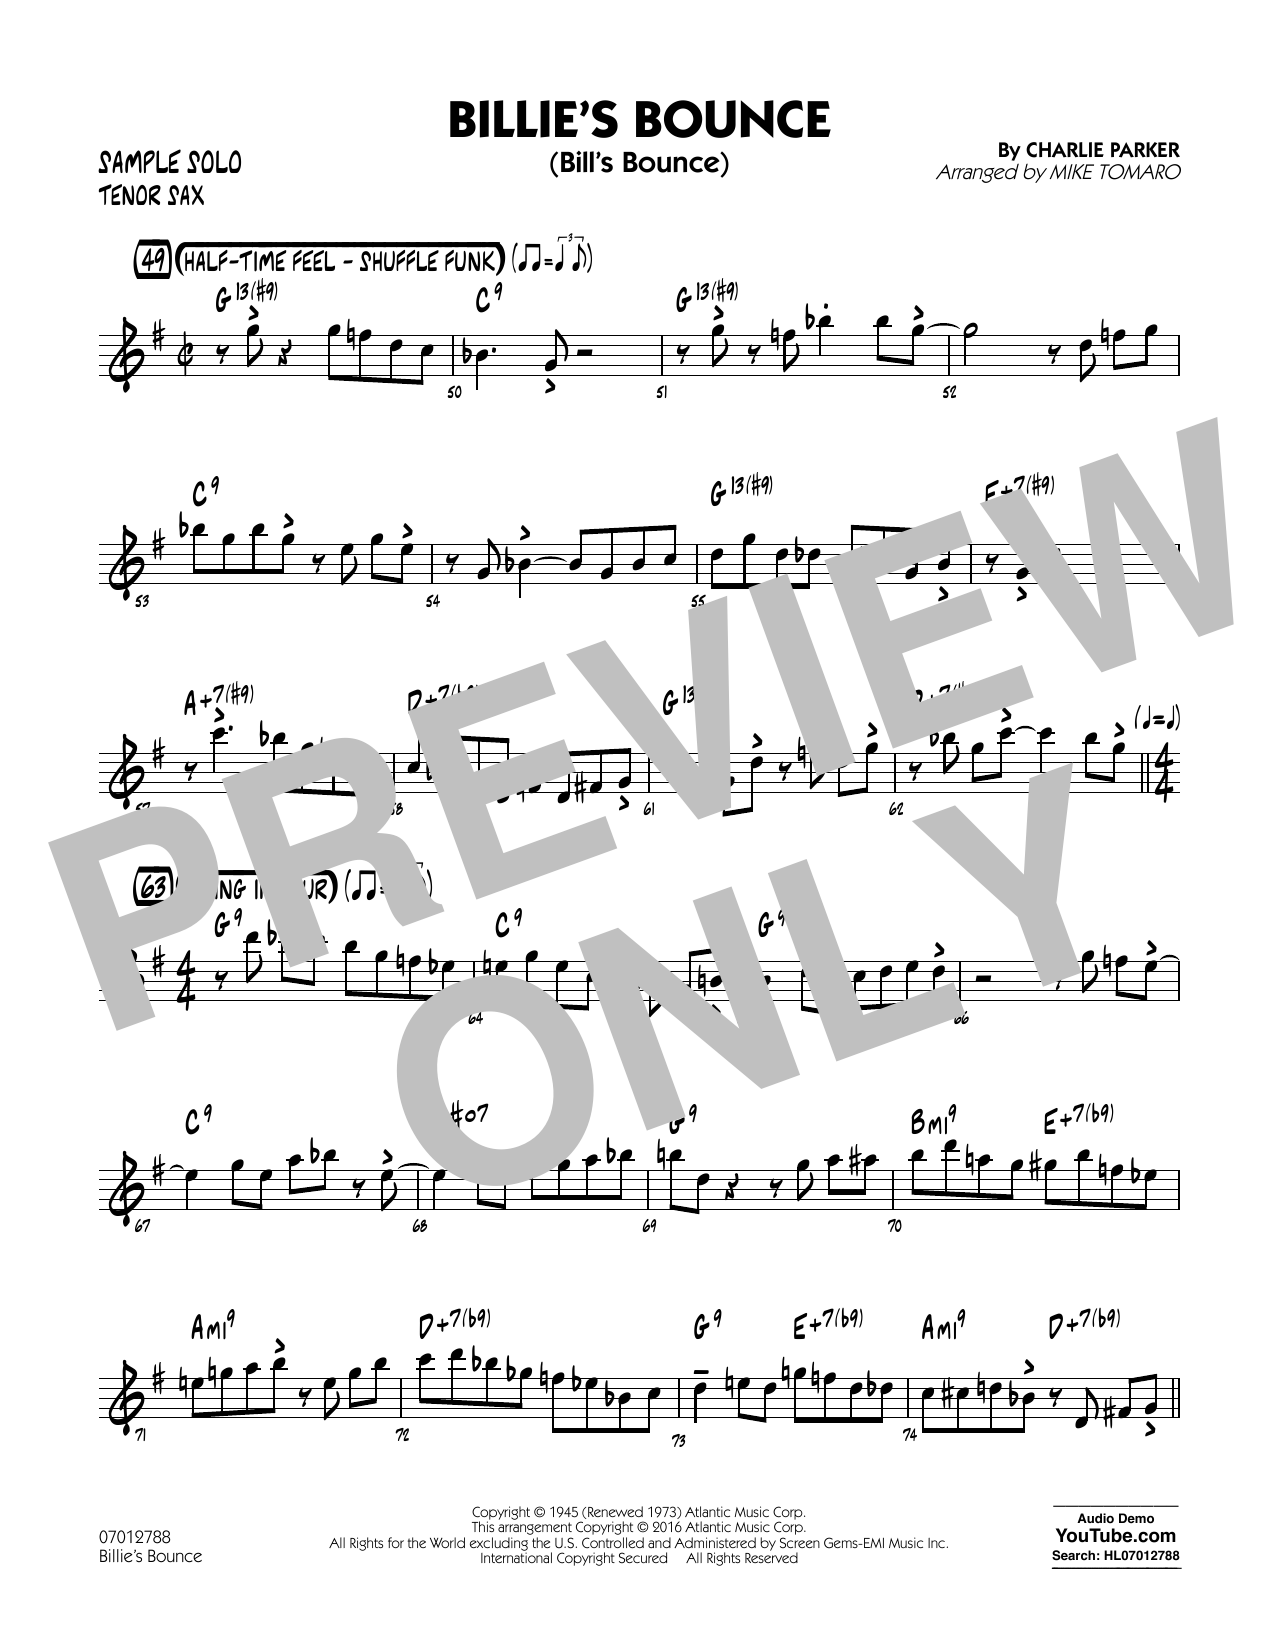 Download Mike Tomaro Billie's Bounce - Tenor Sax Sample Solo Sheet Music